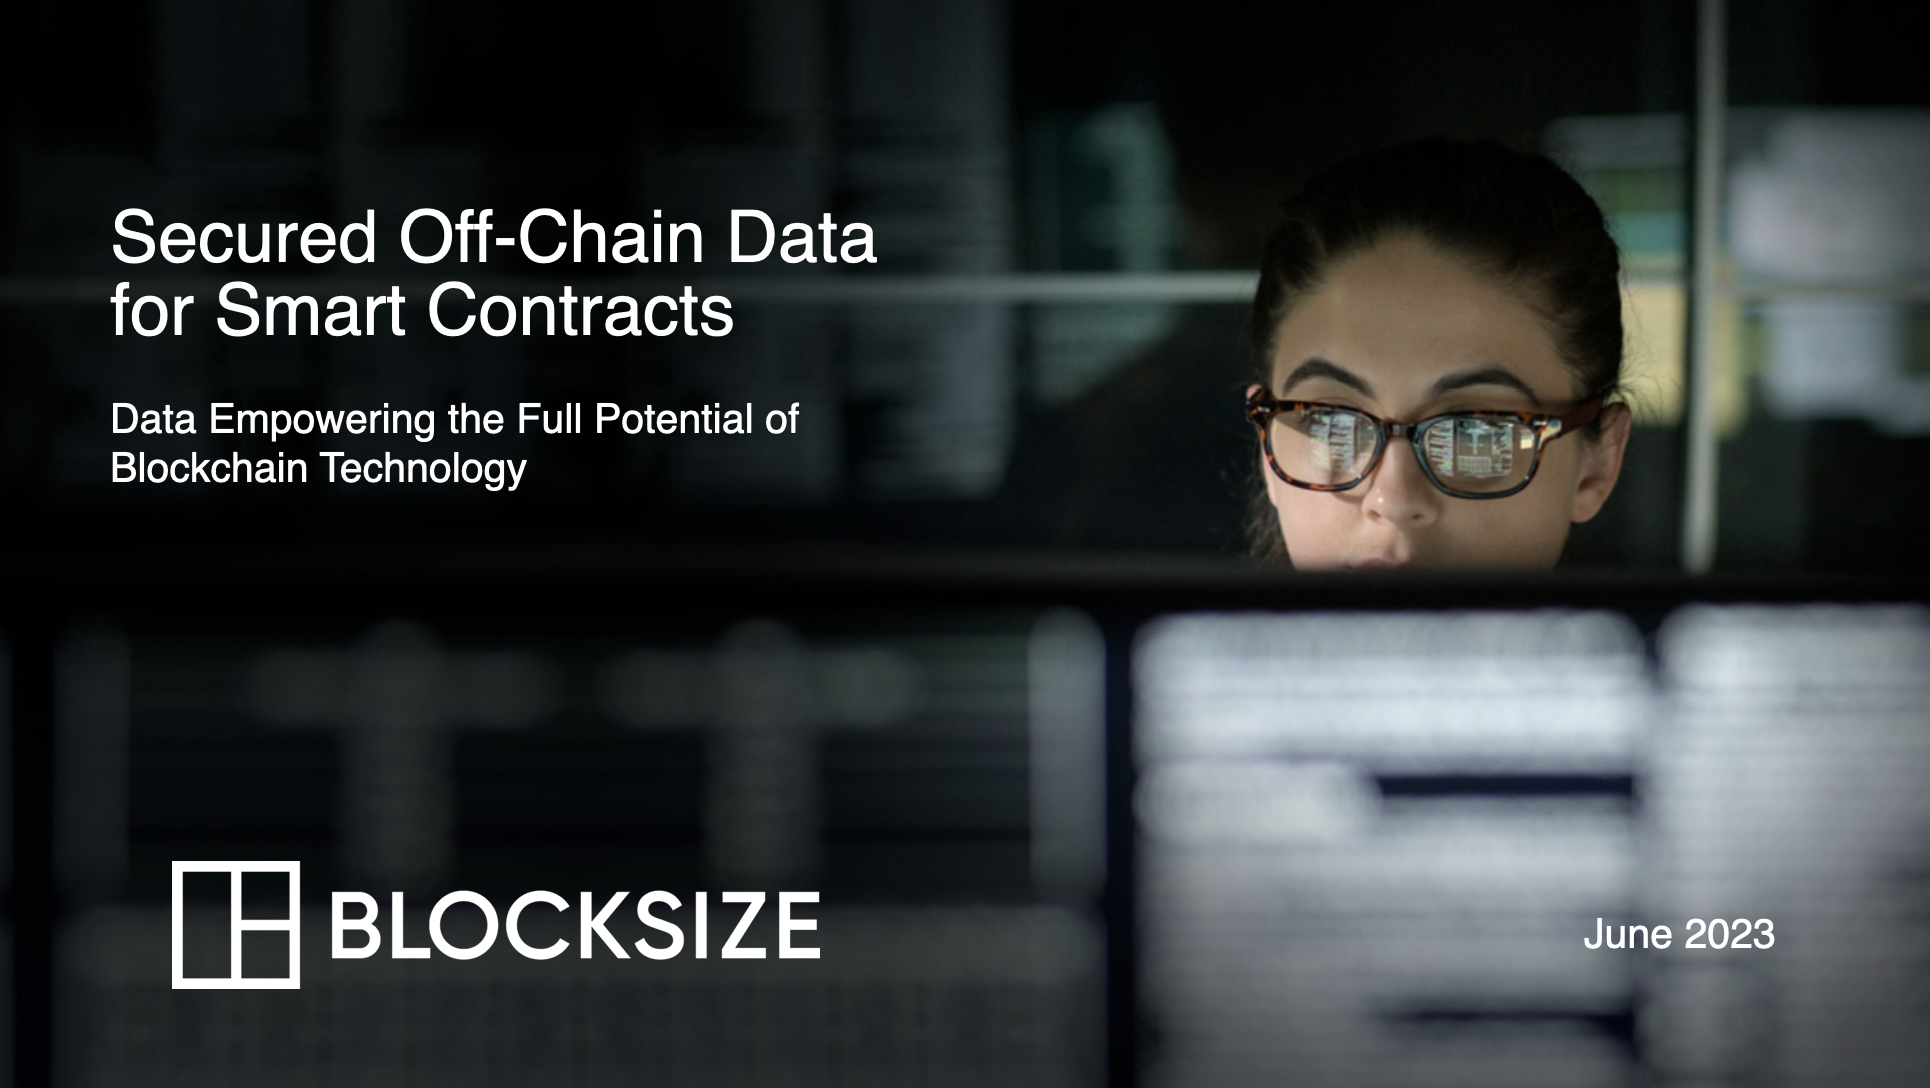 Secured off-chain data for smart contracts - BLOCKSIZE